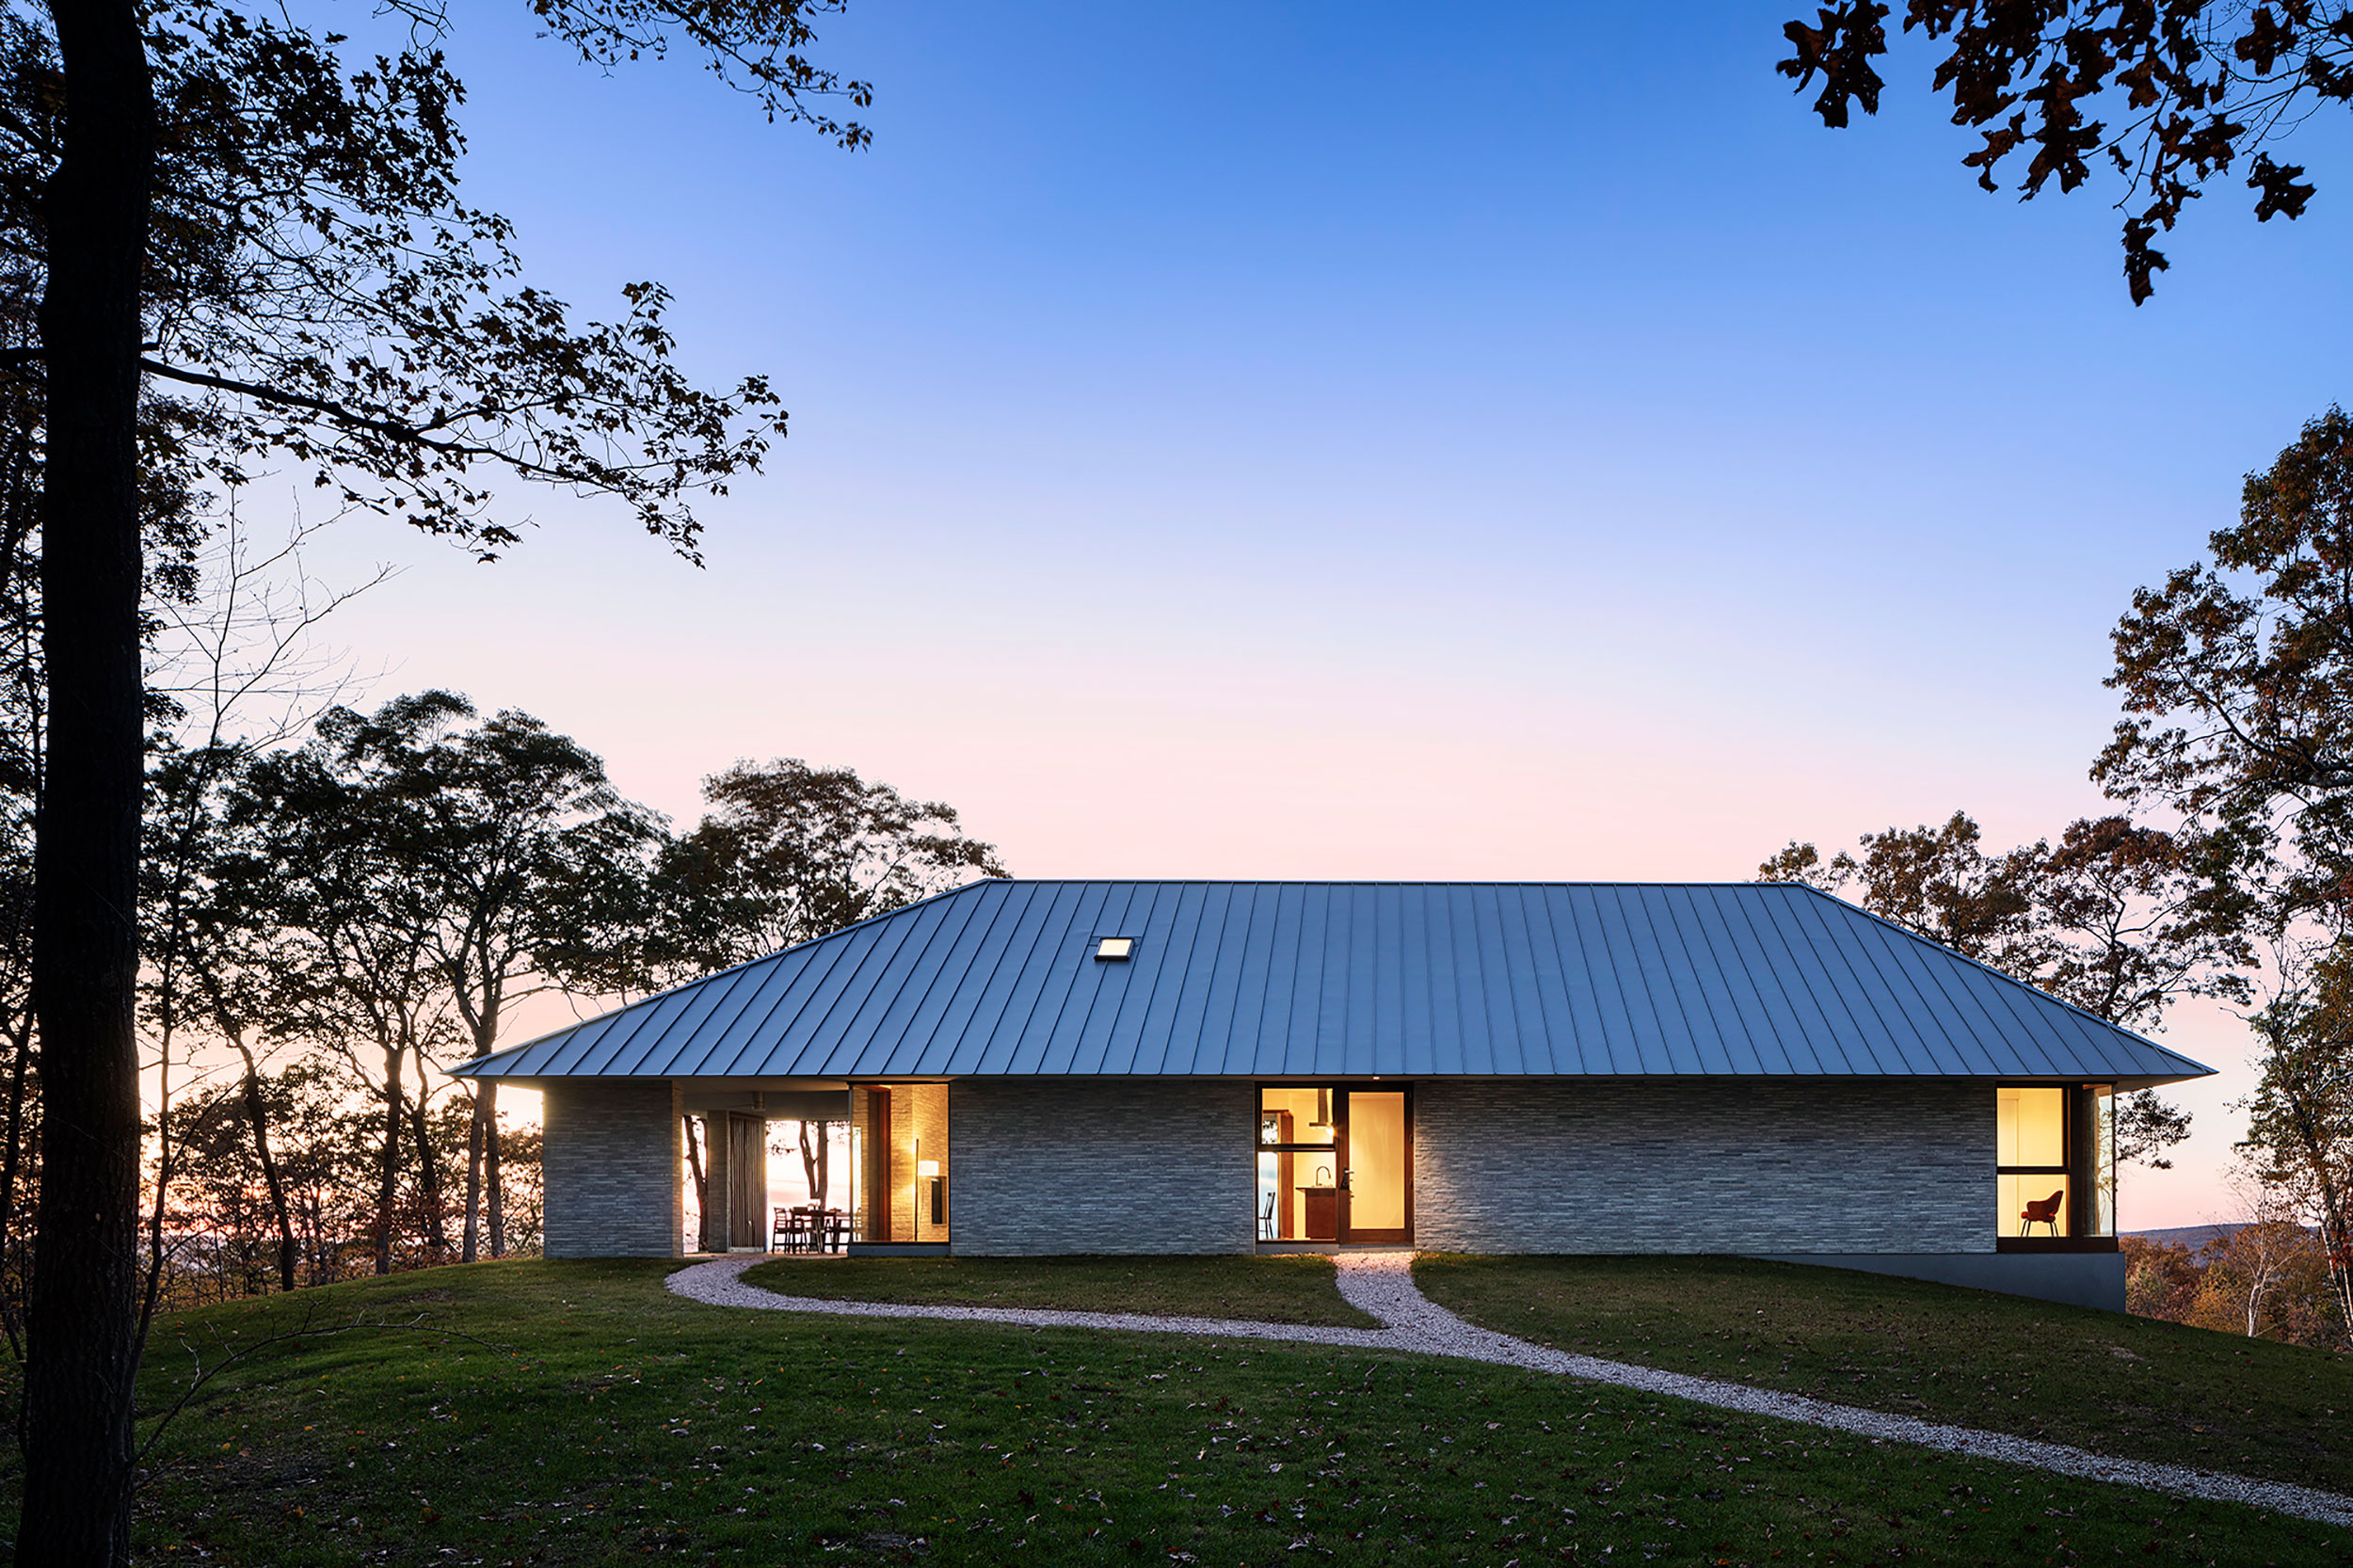 Mount Mauwee House by Paul Schulhof, AIA, in South Kent, CT. Photo: Michael Moran.